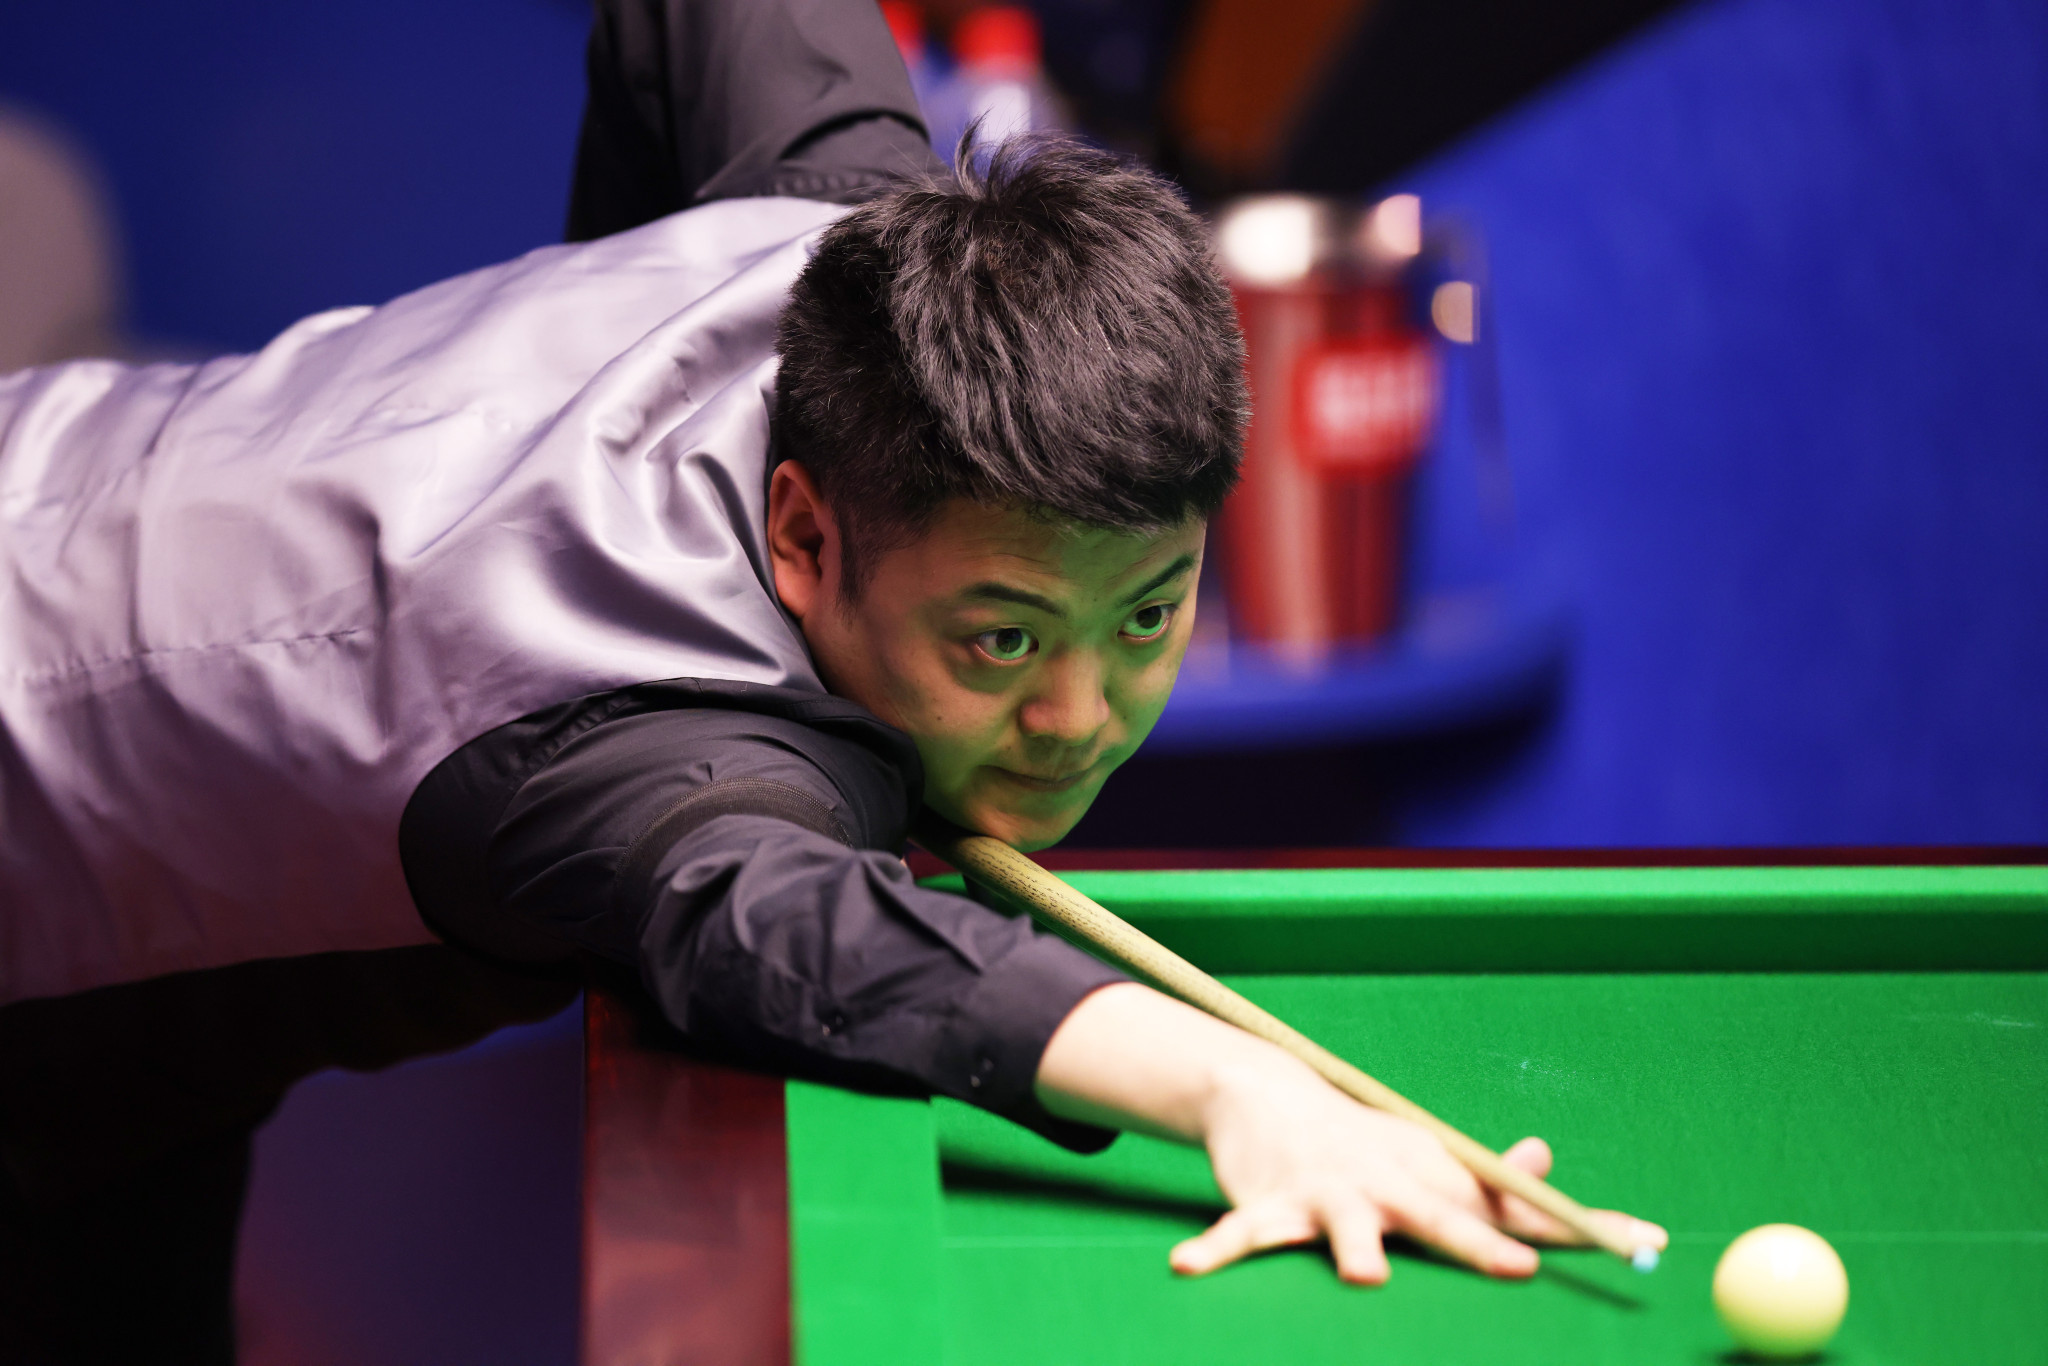 Liang Wenbo was also given a life ban by the WPBSA for his leading role in a match-fixing scandal ©Getty Images